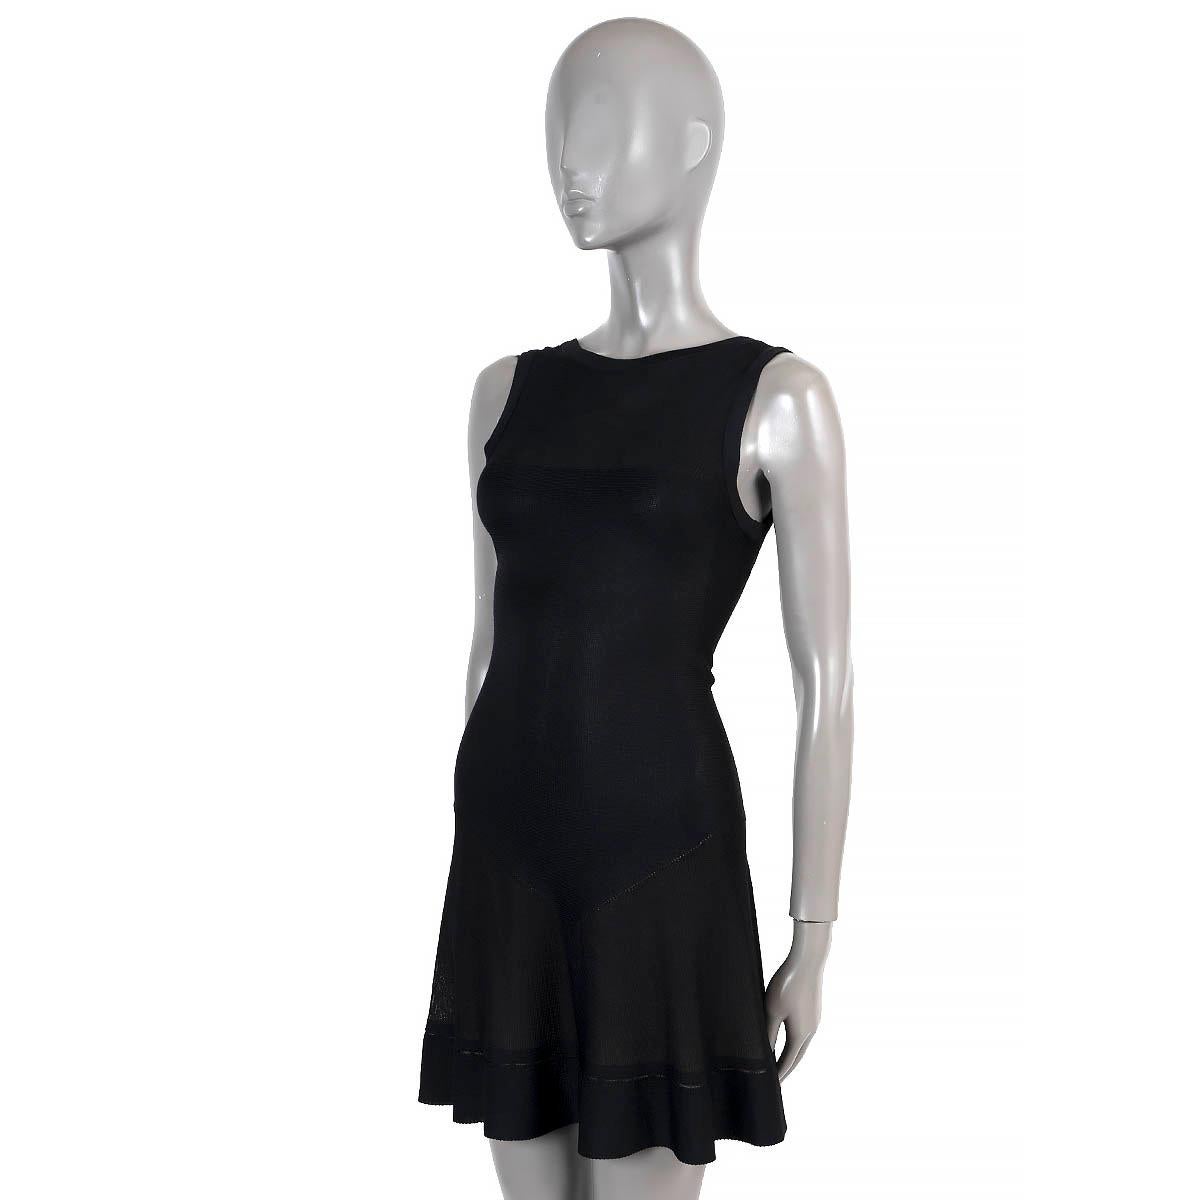 100% authentic Alaïa sleeveless knit dress in black viscose (100%). Features a v-neckline at the back. Closes with an invisible zipper on the back. Lined in silk (100%). Has been worn and is in excellent condition.

Measurements
Tag